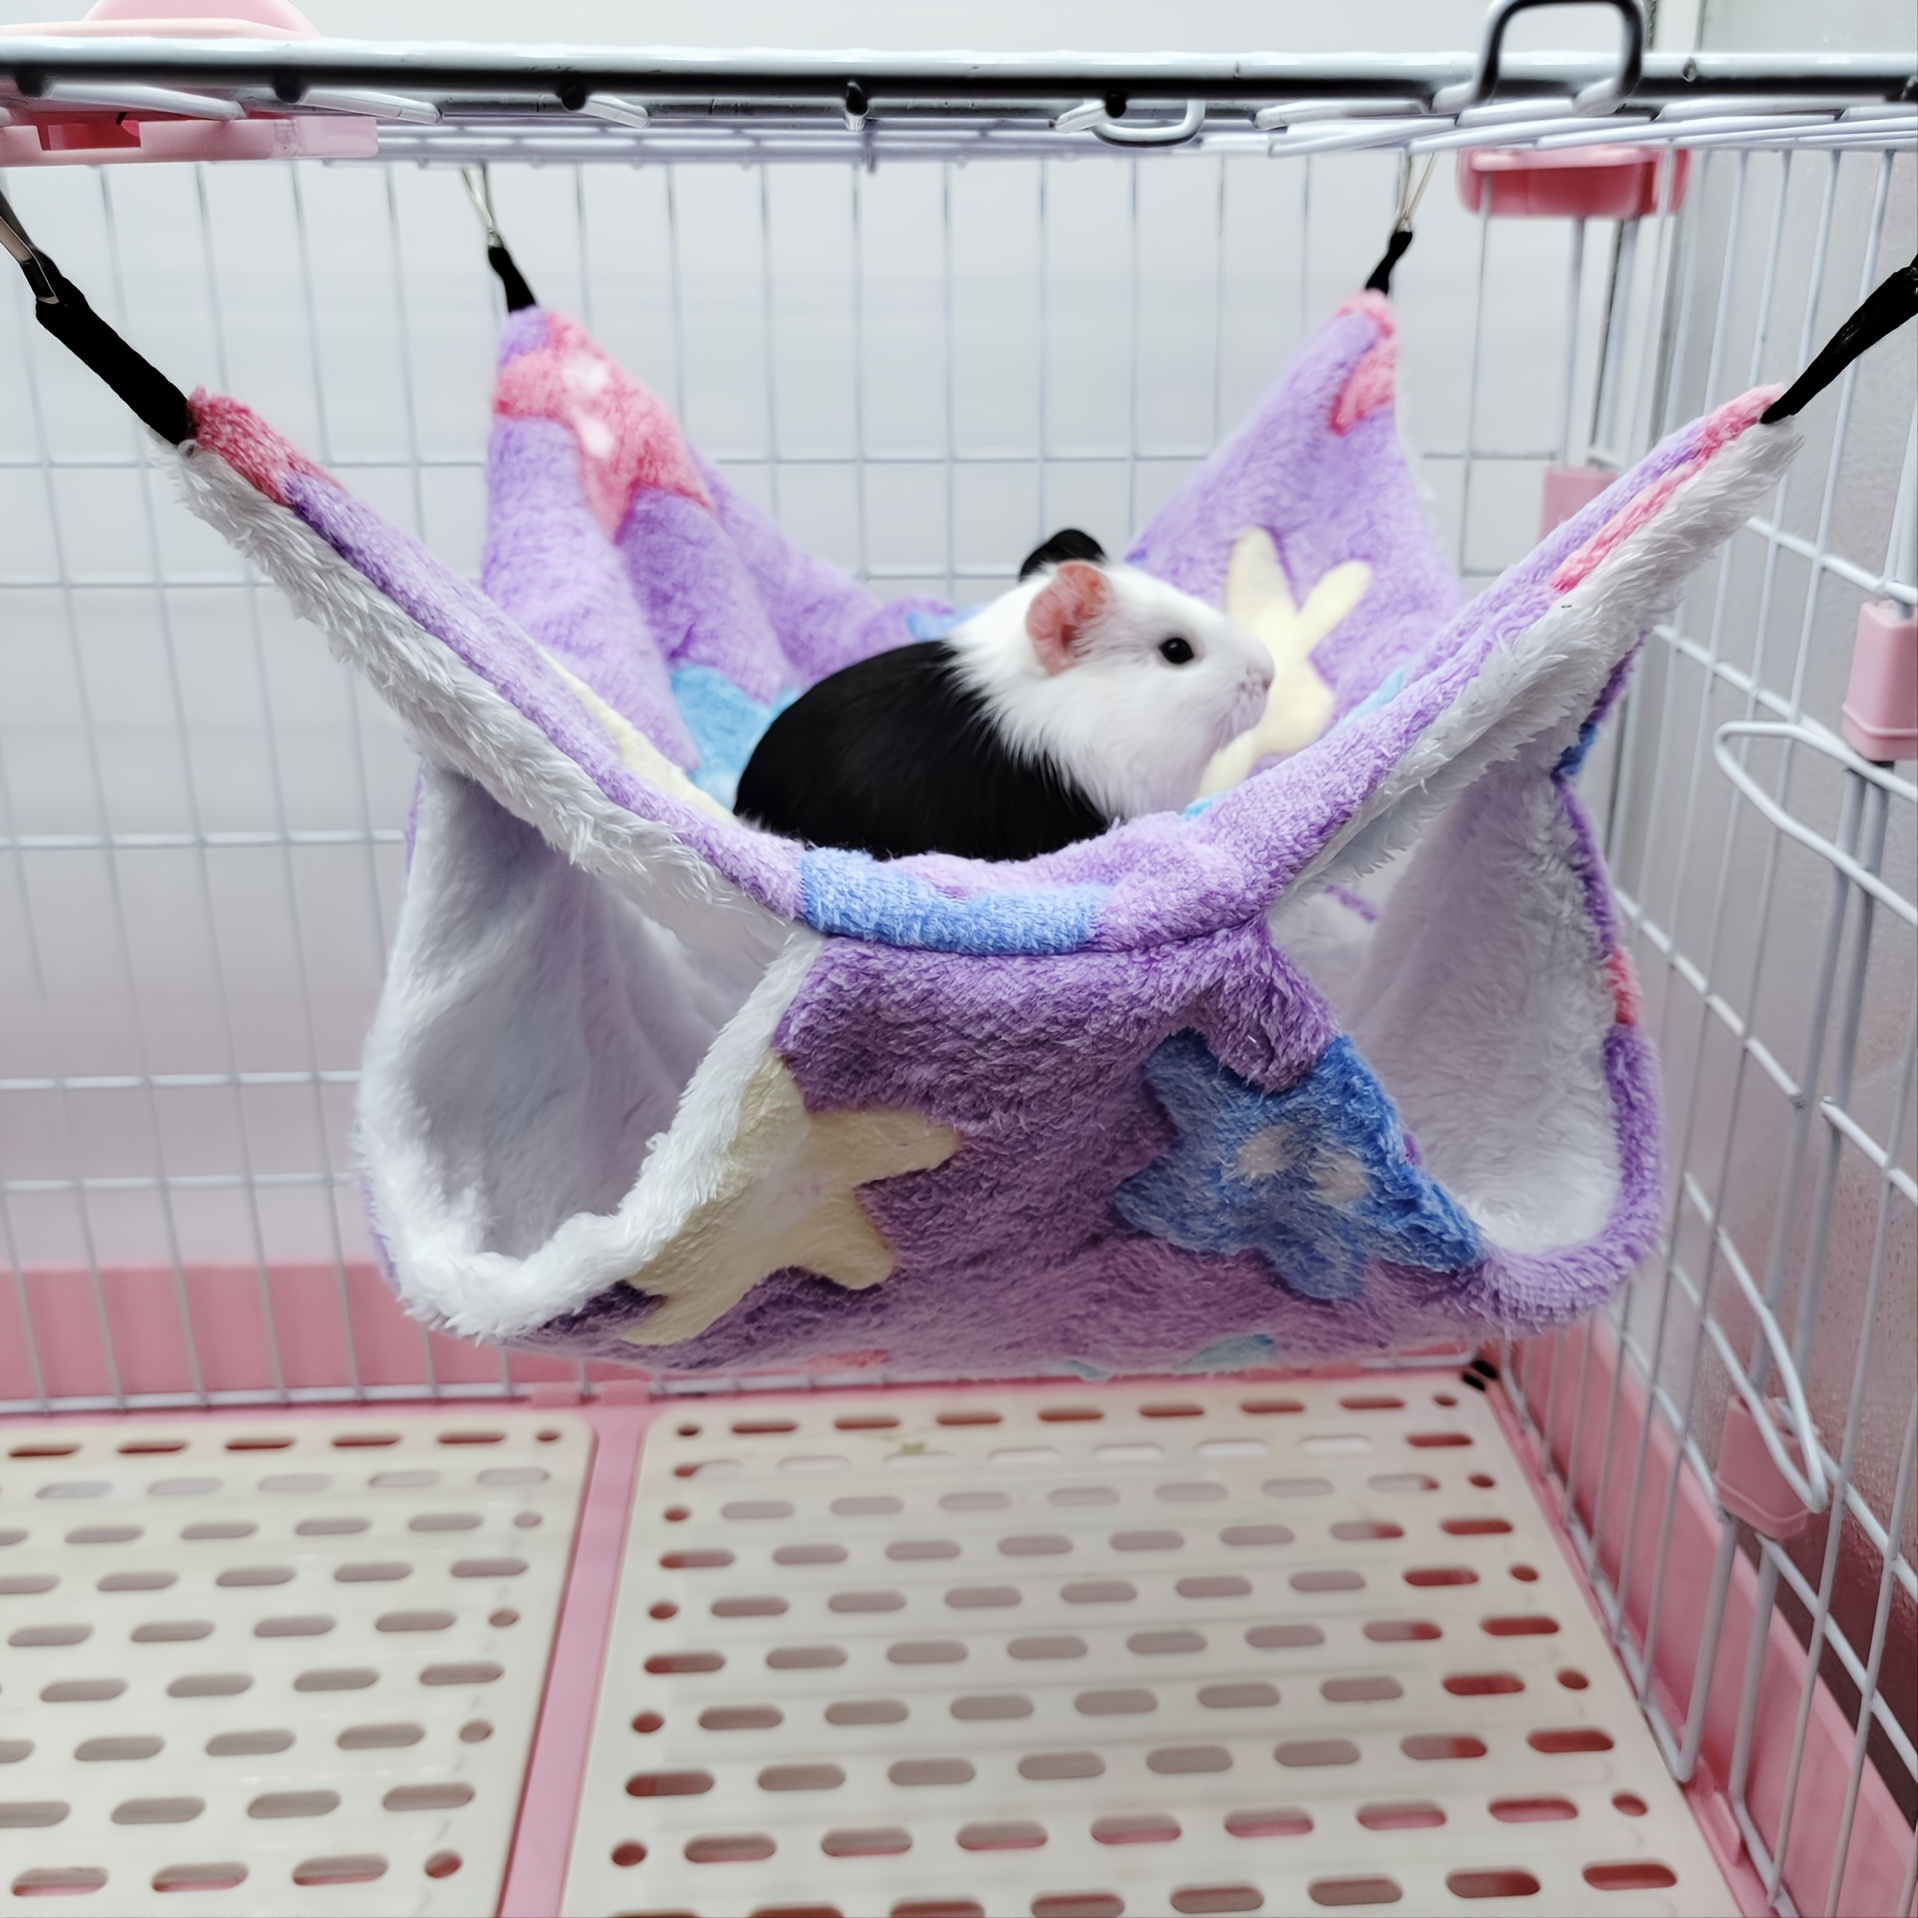 

Cozy Hanging Bed For Guinea Pigs, Rats, Hamsters, And Ferrets - Soft And Comfortable Cage Accessory For Your Furry Friend